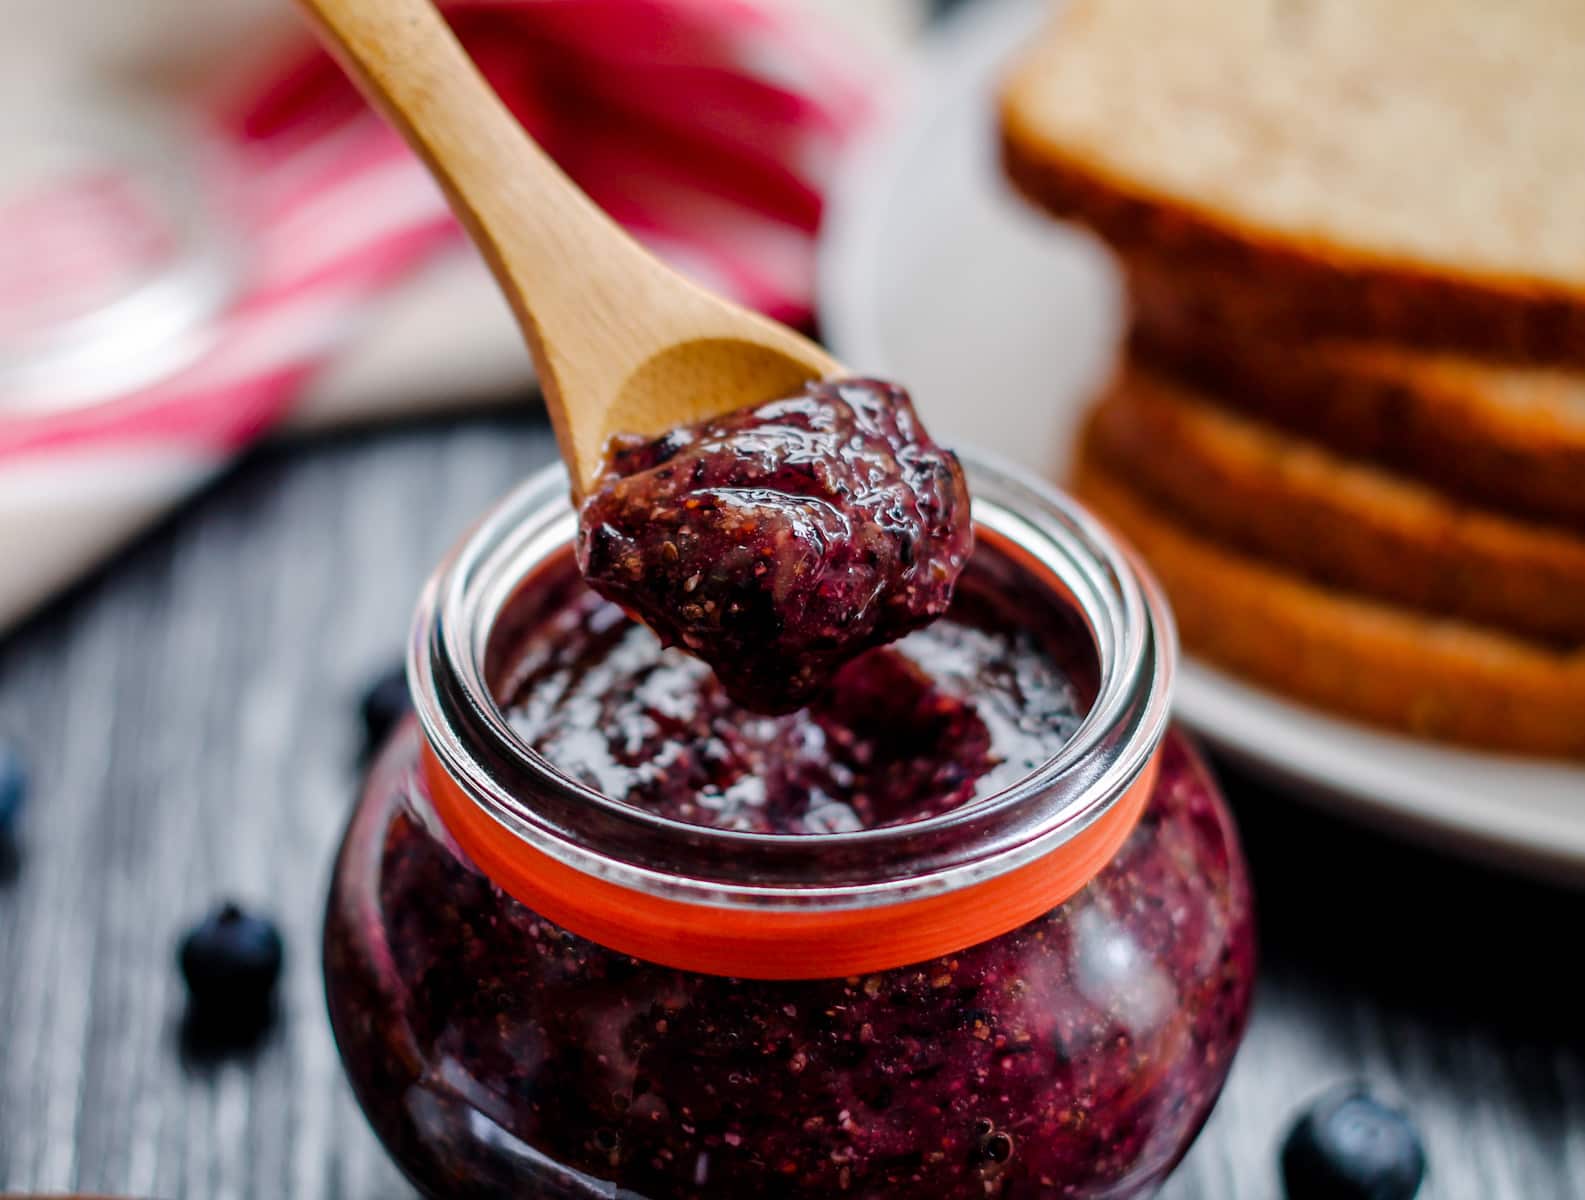 a spoon scooping healthy blueberry chia jam from a jar.